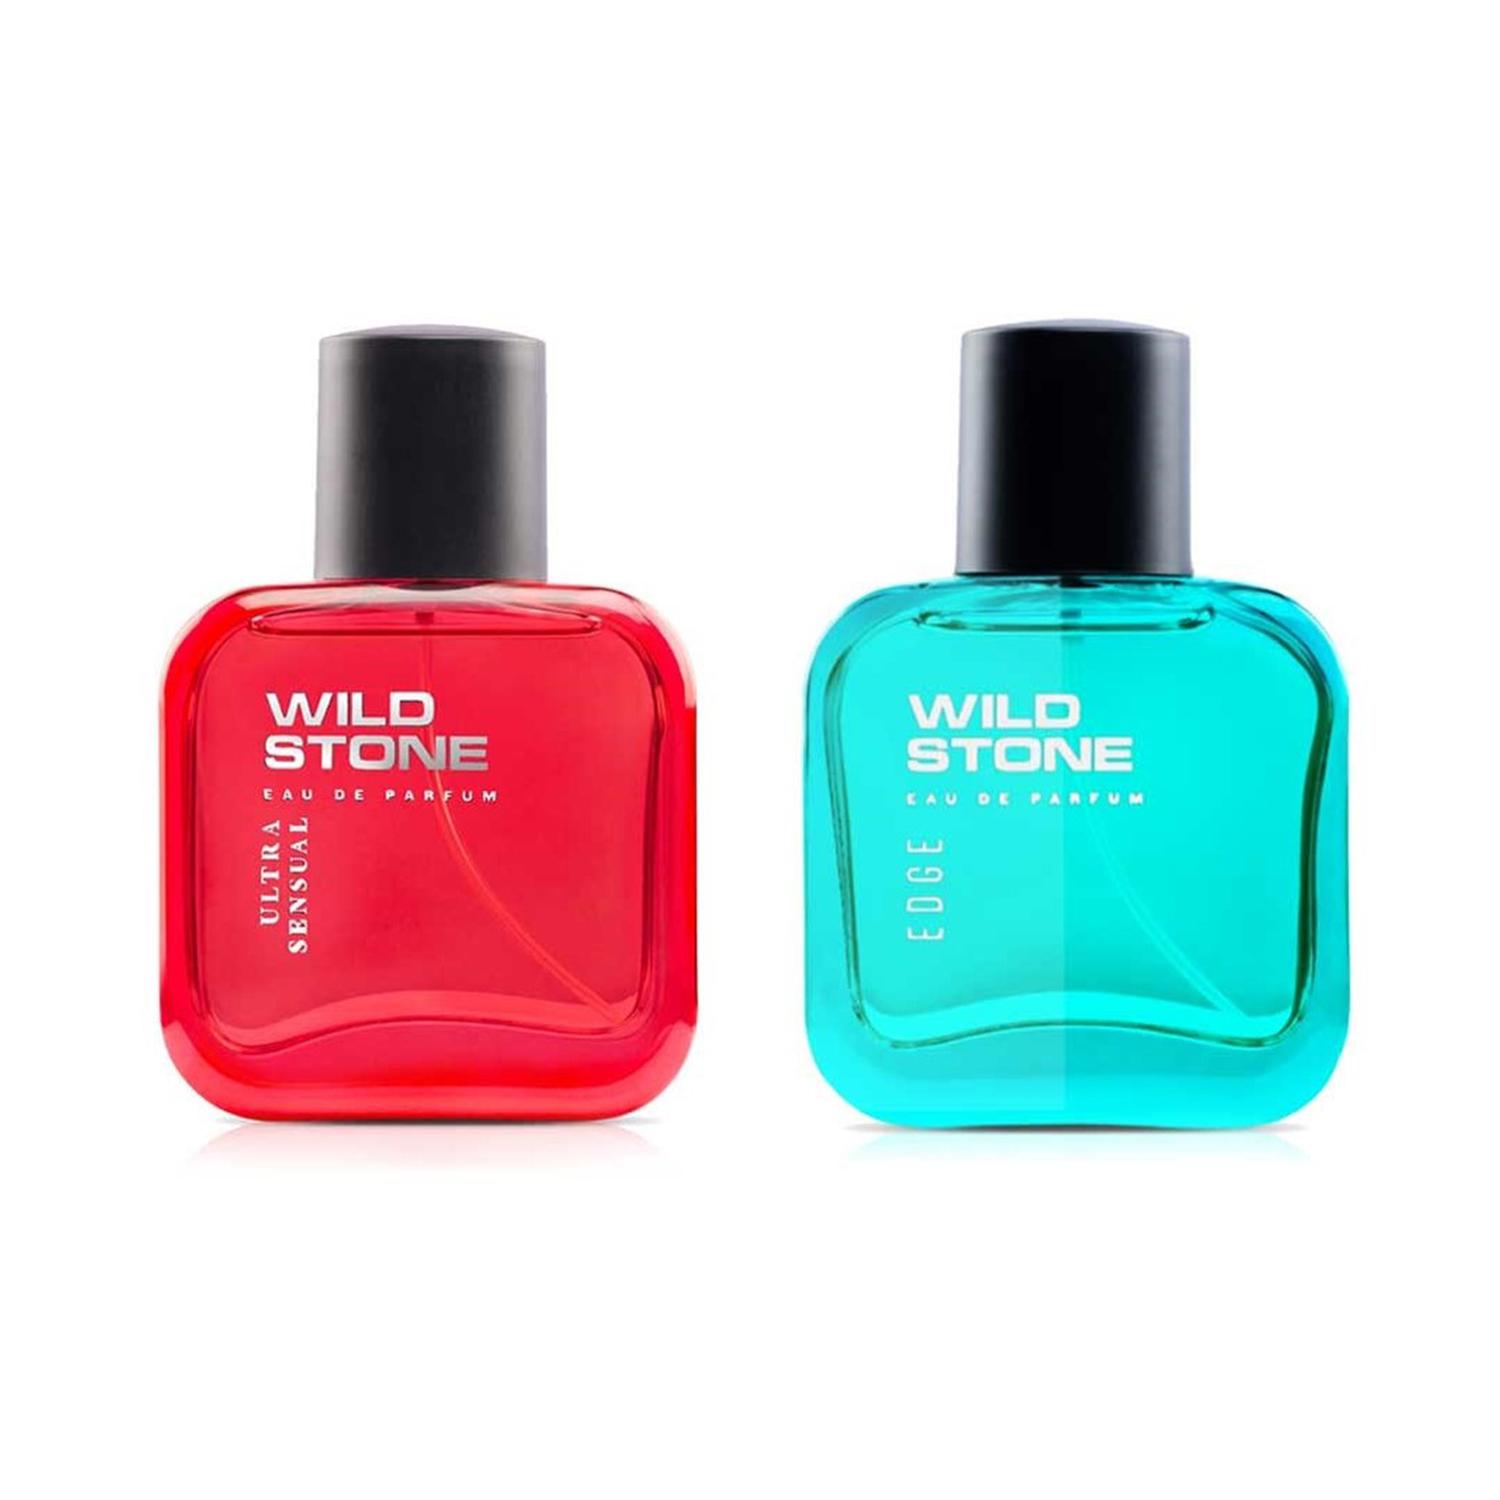 Wild Stone | Wild Stone Edge and Ultra Sensual Perfume Combo for Men (50ml Each) (Pack of 2) Combo